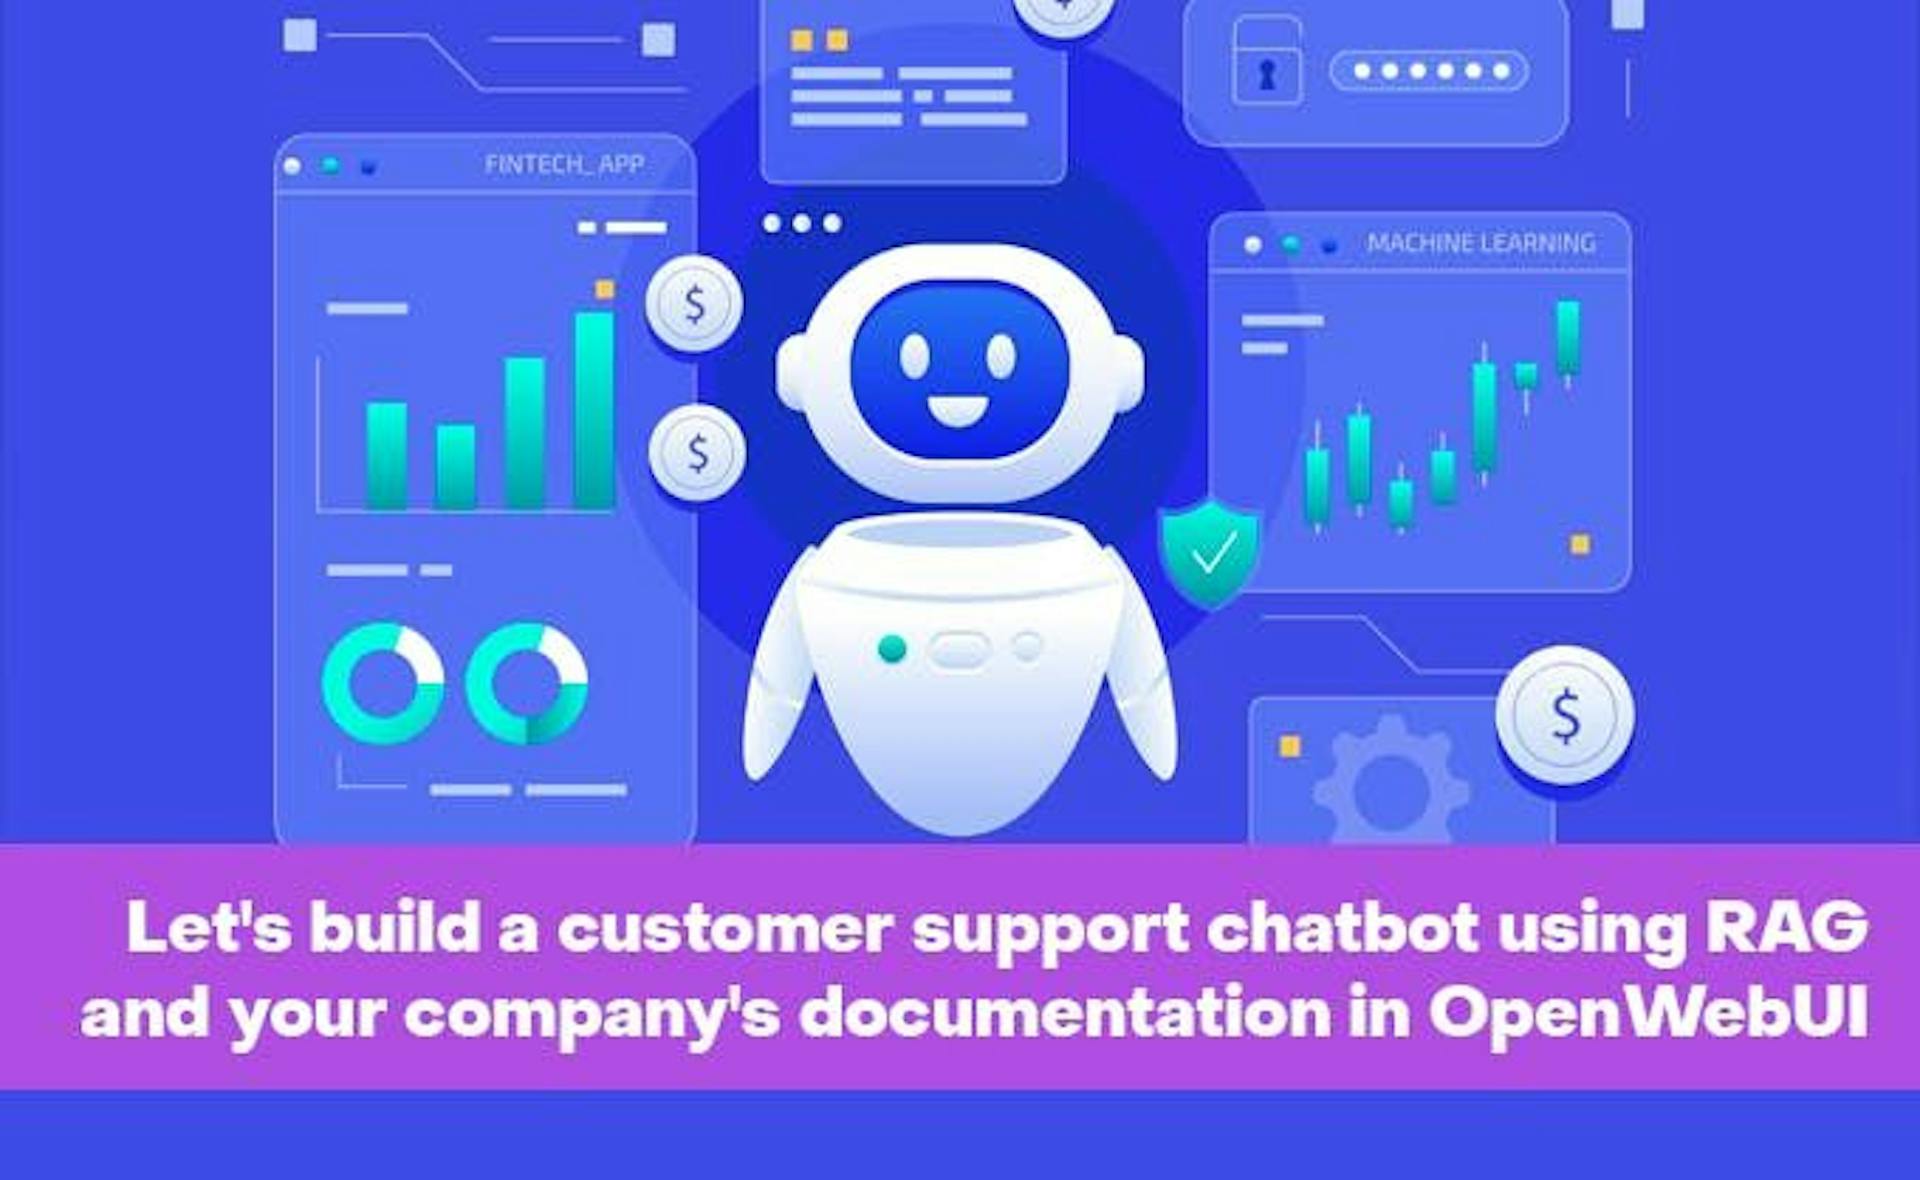 featured image - Let's build a customer support chatbot using RAG and your company's documentation in OpenWebUI